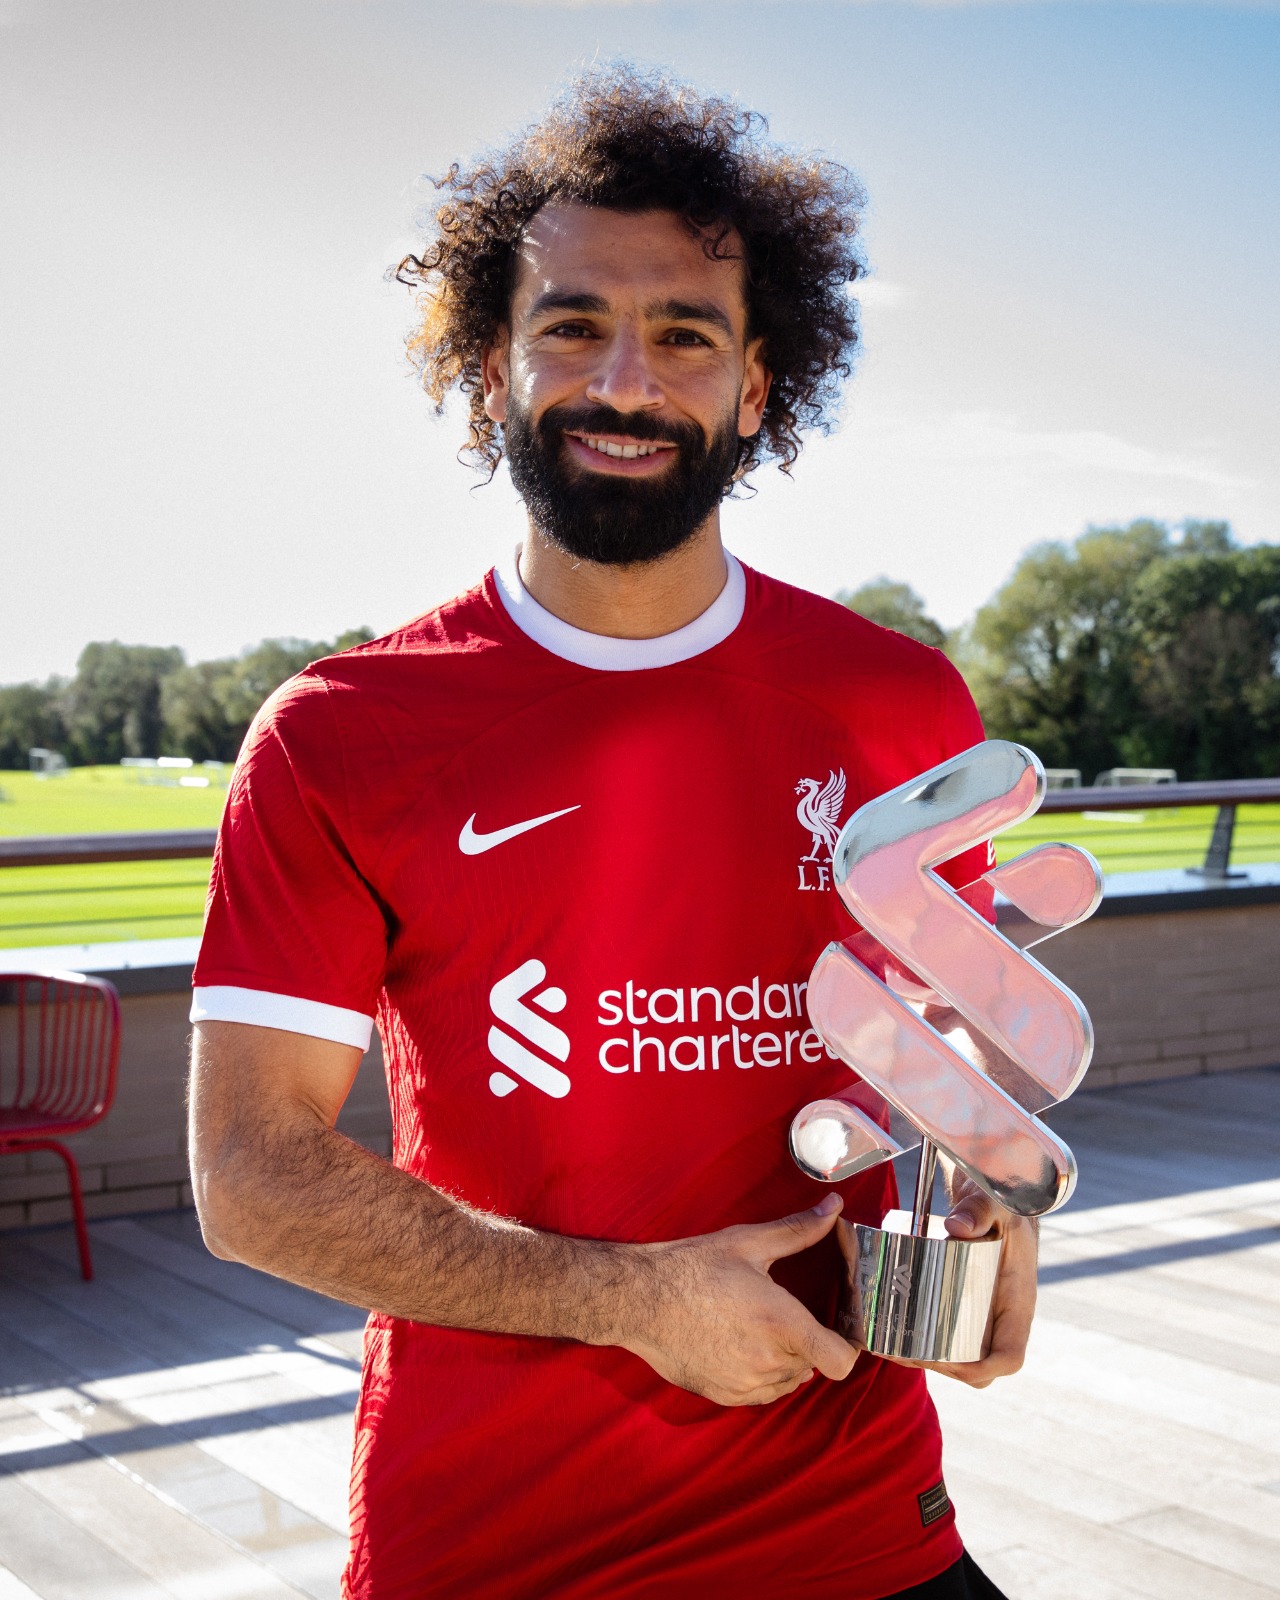 Mo Salah holding the Standard Chartered Player of the Month award.